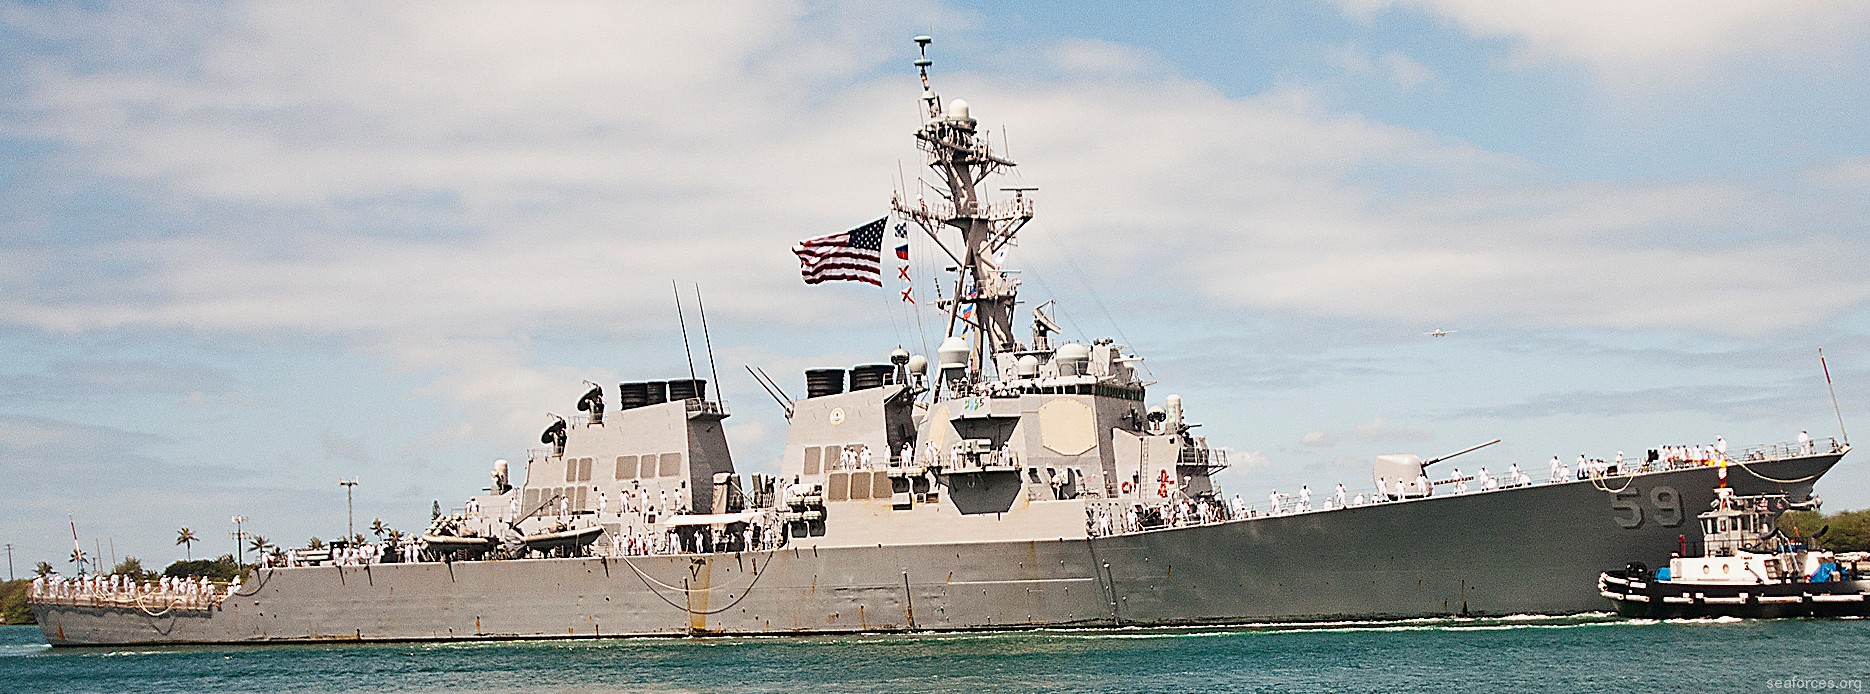 ddg-59 uss russell guided missile destroyer us navy 11 pearl harbor hawaii